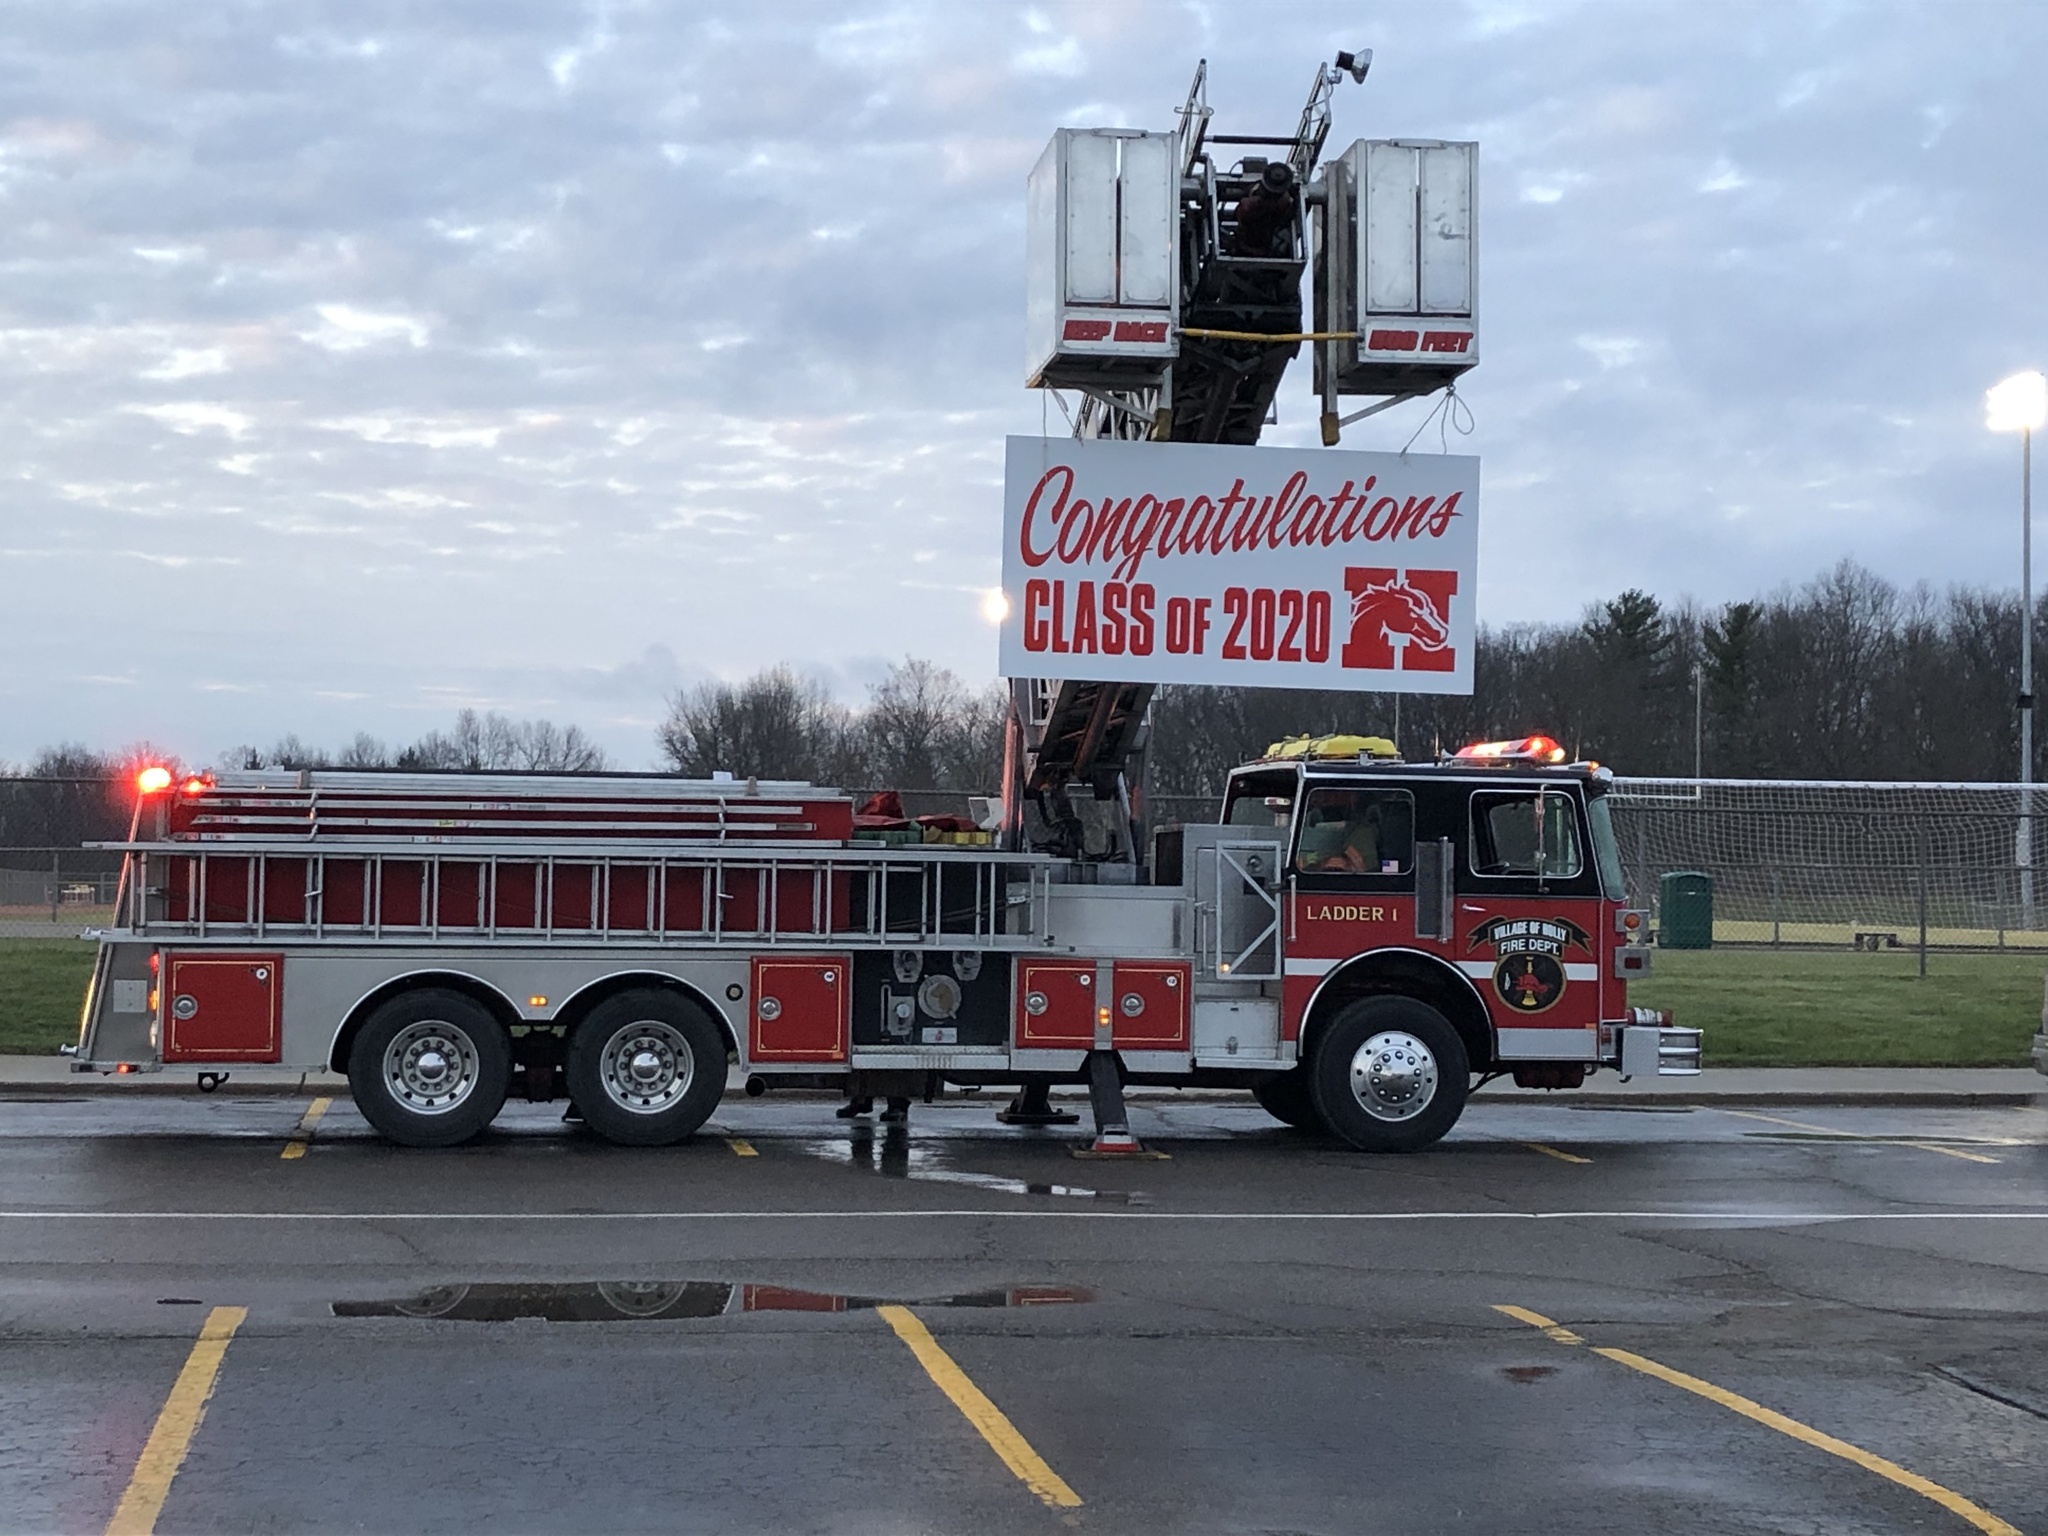 Fire truck with sign - congratulations class of 2020